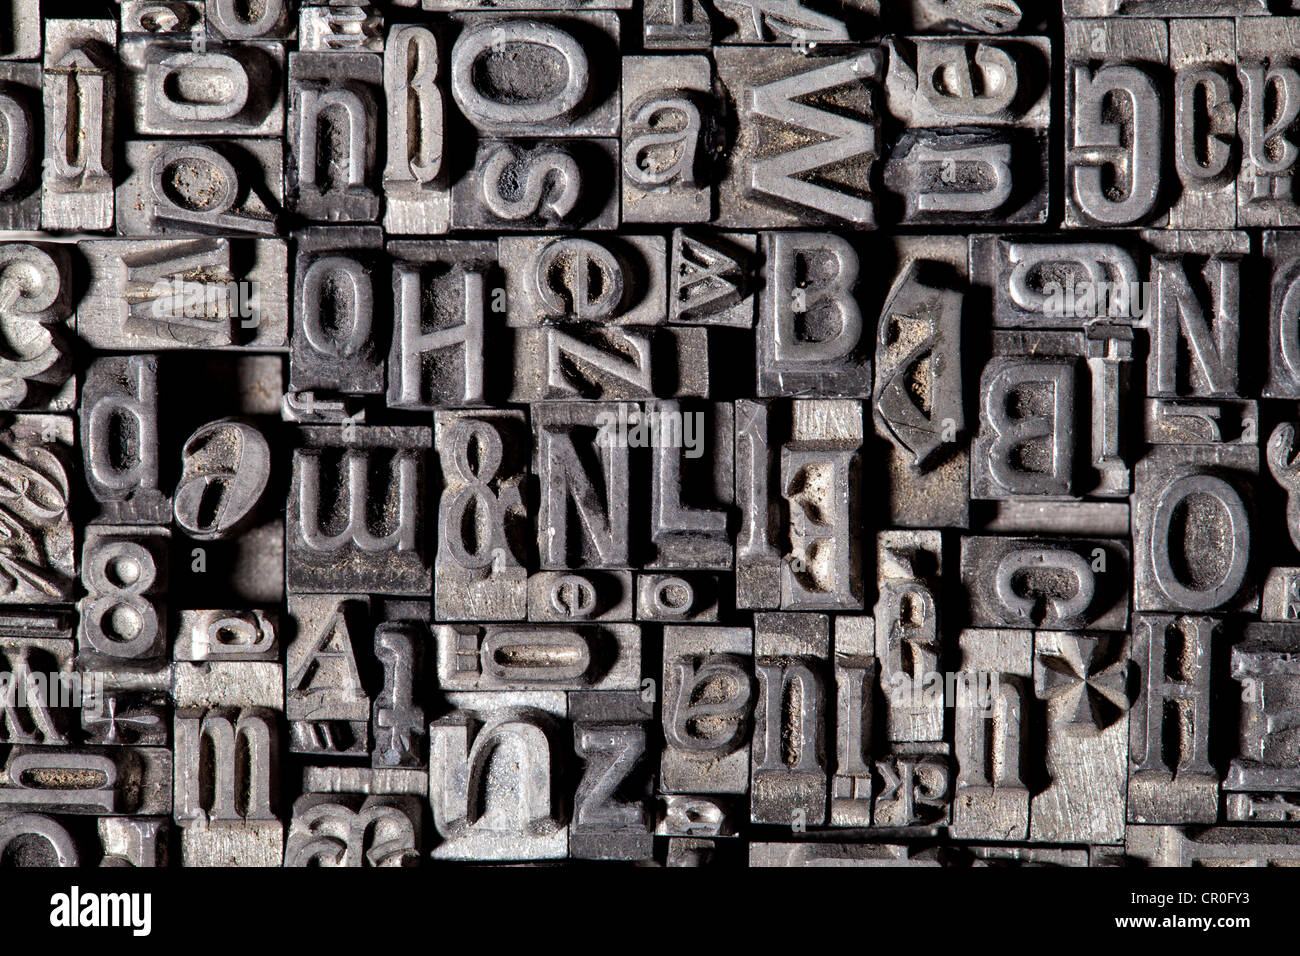 Old lead type for letterpress printing, mirrored Stock Photo